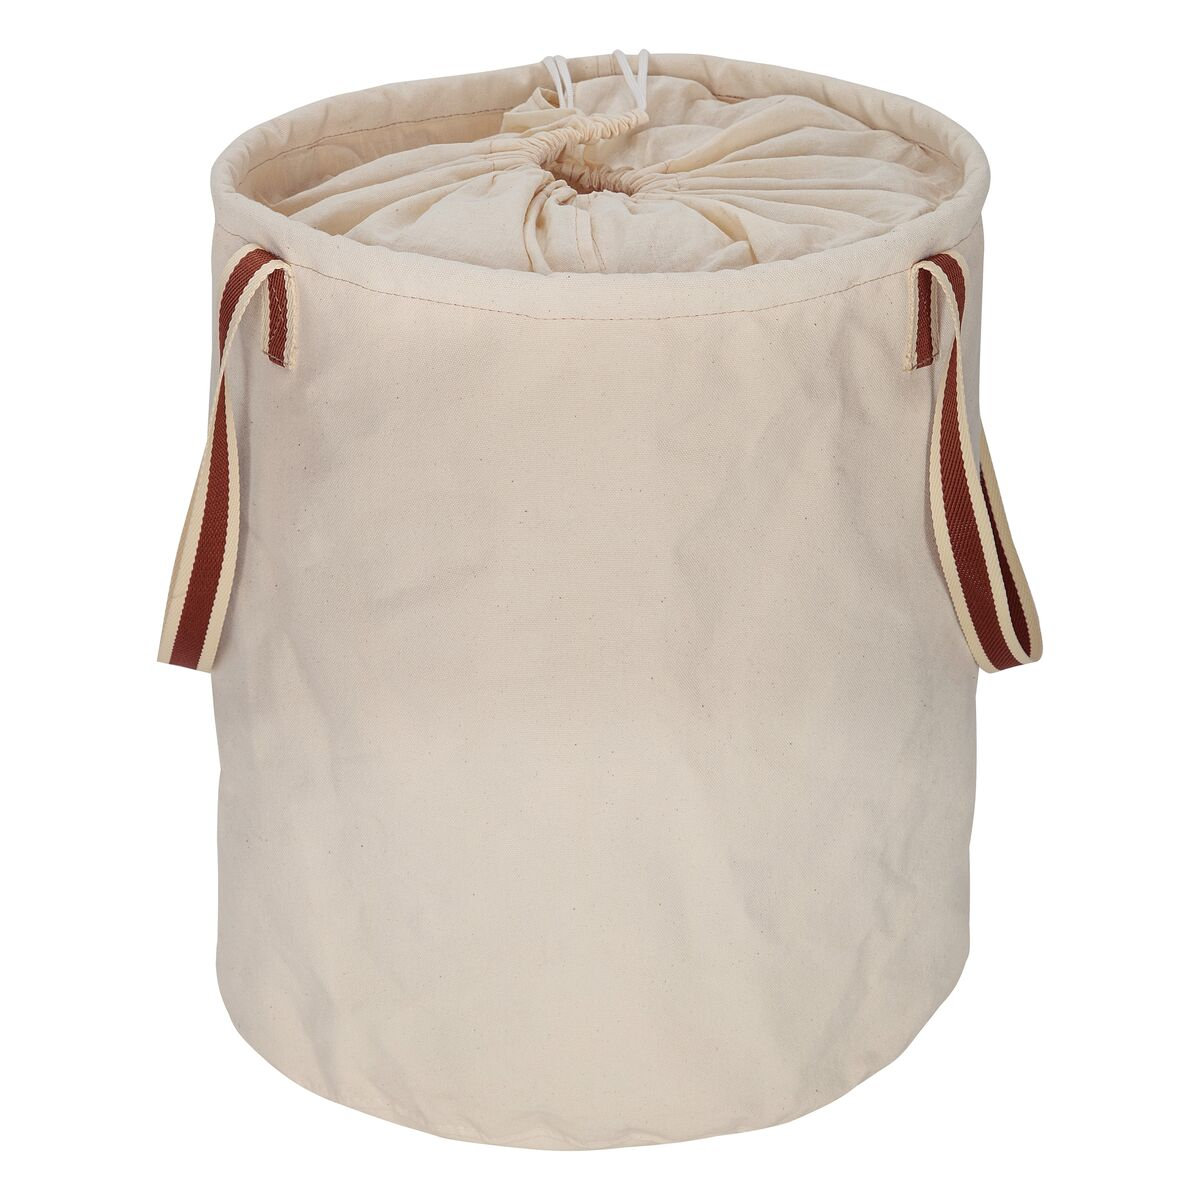 
Tramontina Organizer Basket in Natural Canvas with Rope Closure
